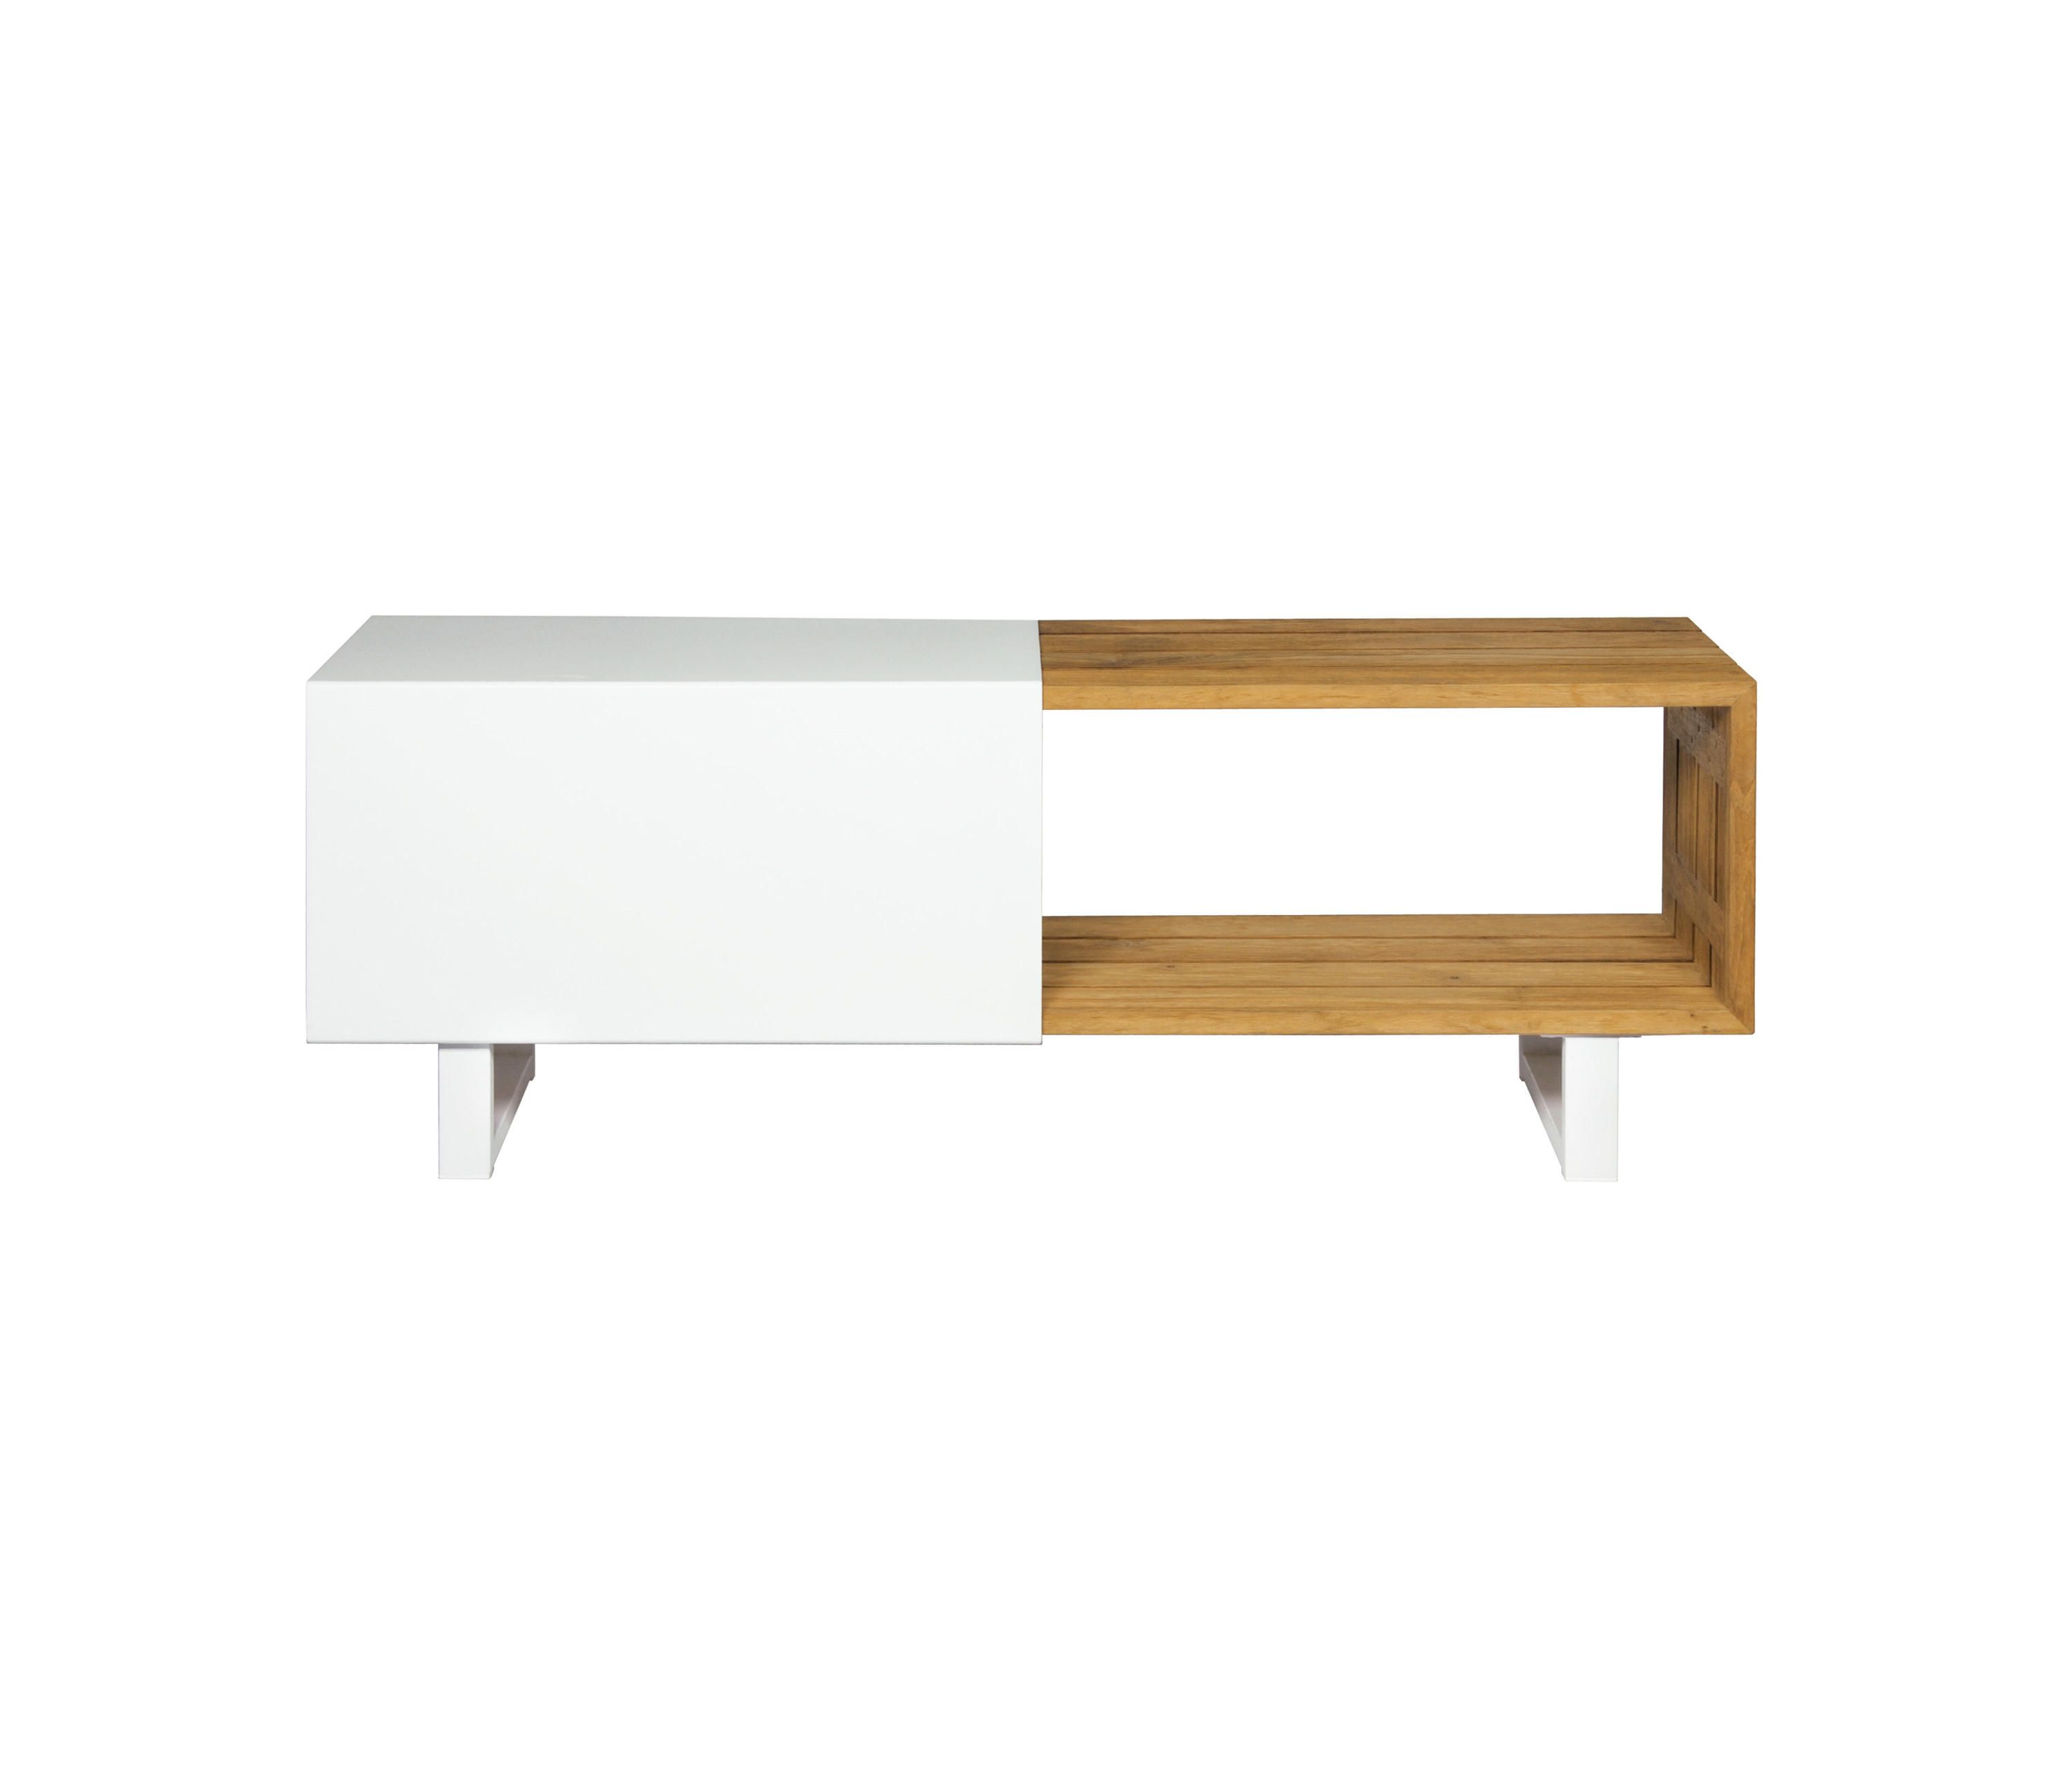 Outbox – Sideboards / Kommoden Von Mamagreen | Architonic Regarding Lola Sideboards (View 22 of 30)